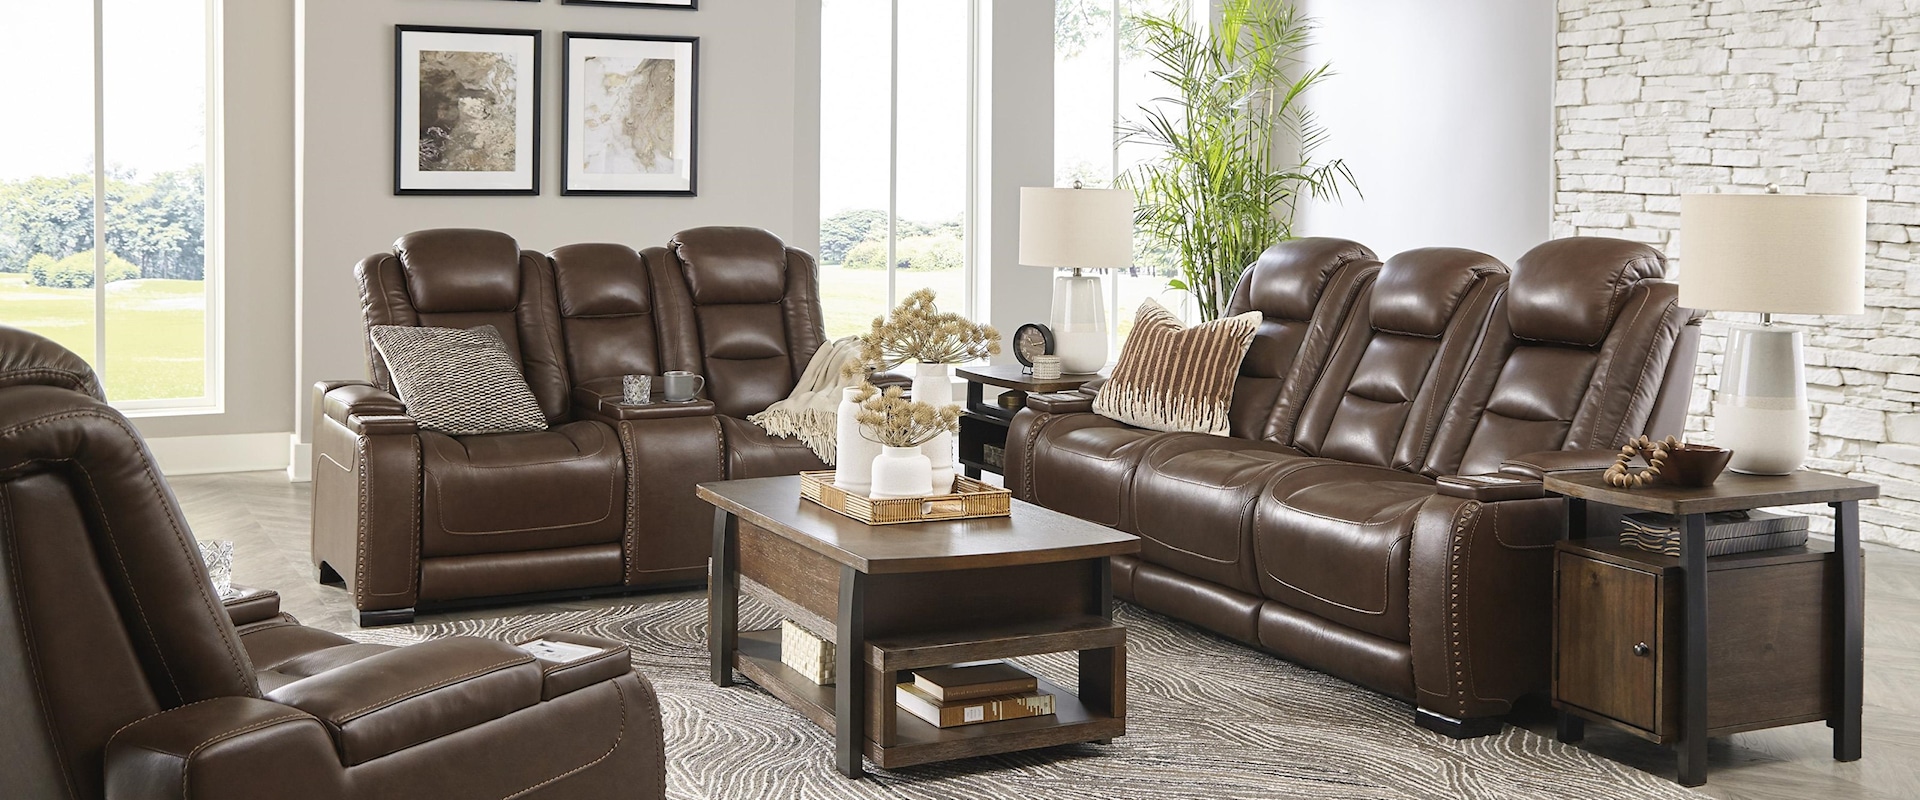 Power Reclining Sofa, Power Reclining Loveseat with Center Console and Power Recliner Set